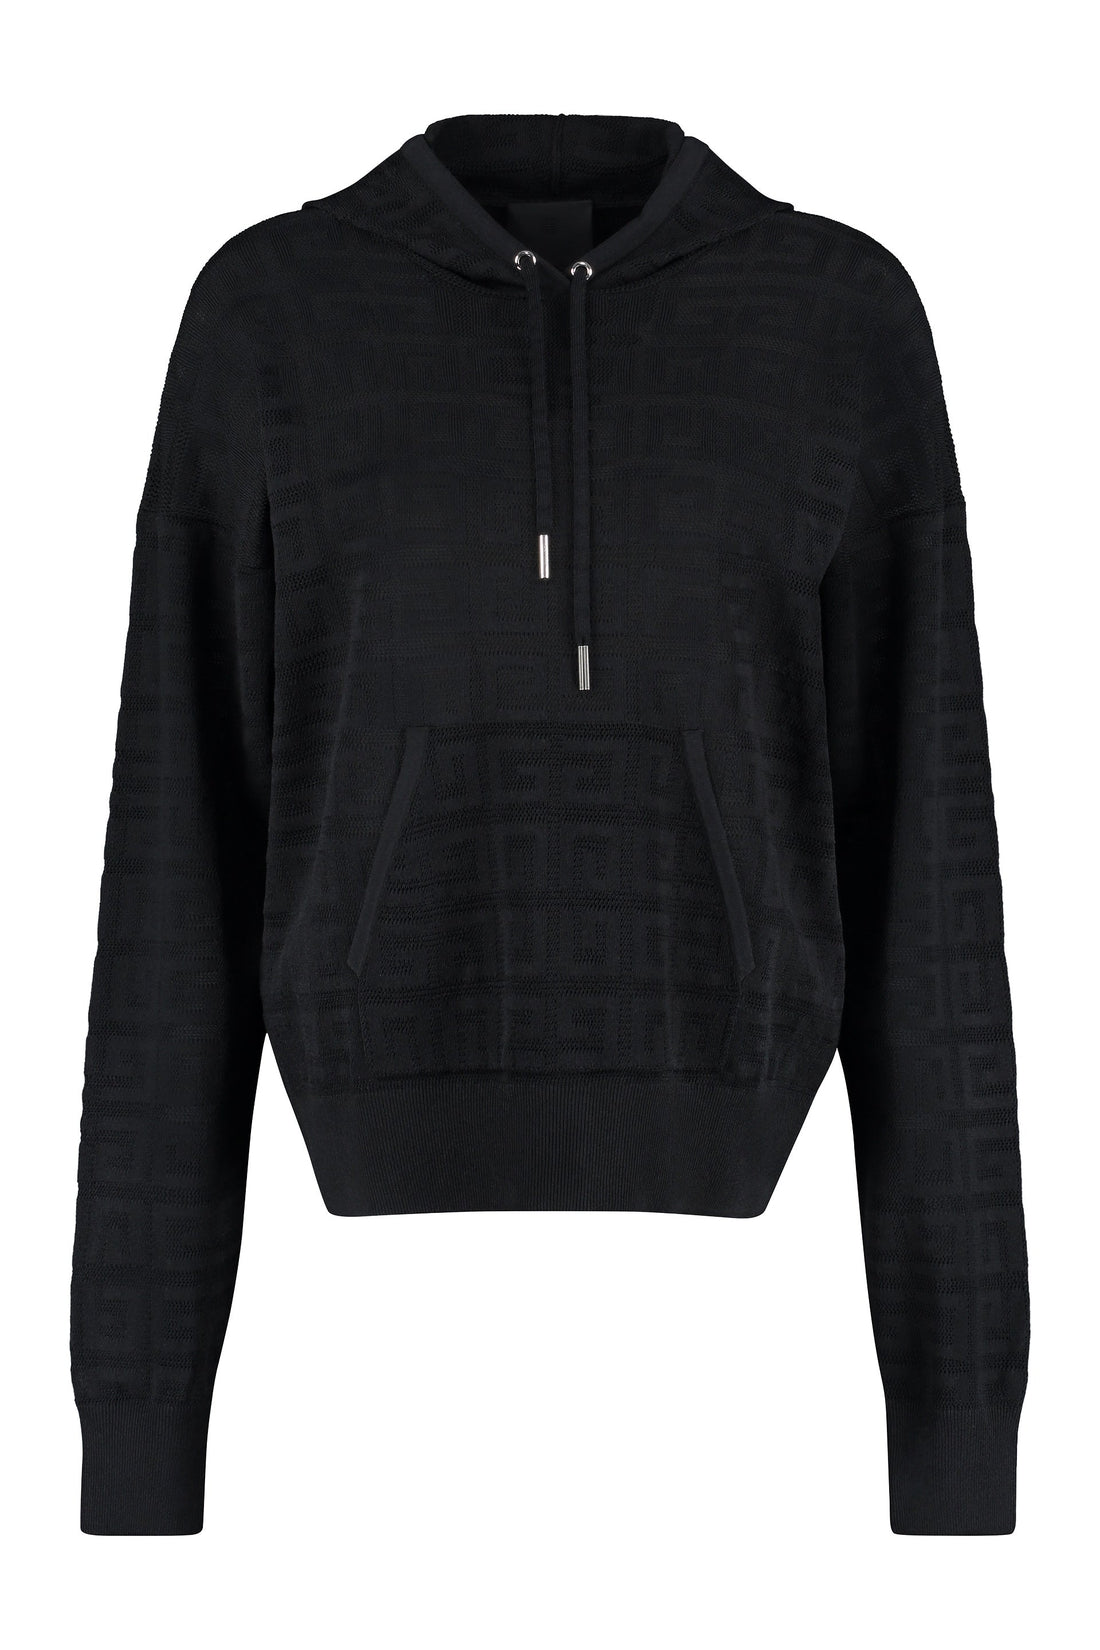 Givenchy-OUTLET-SALE-Hooded sweatshirt-ARCHIVIST